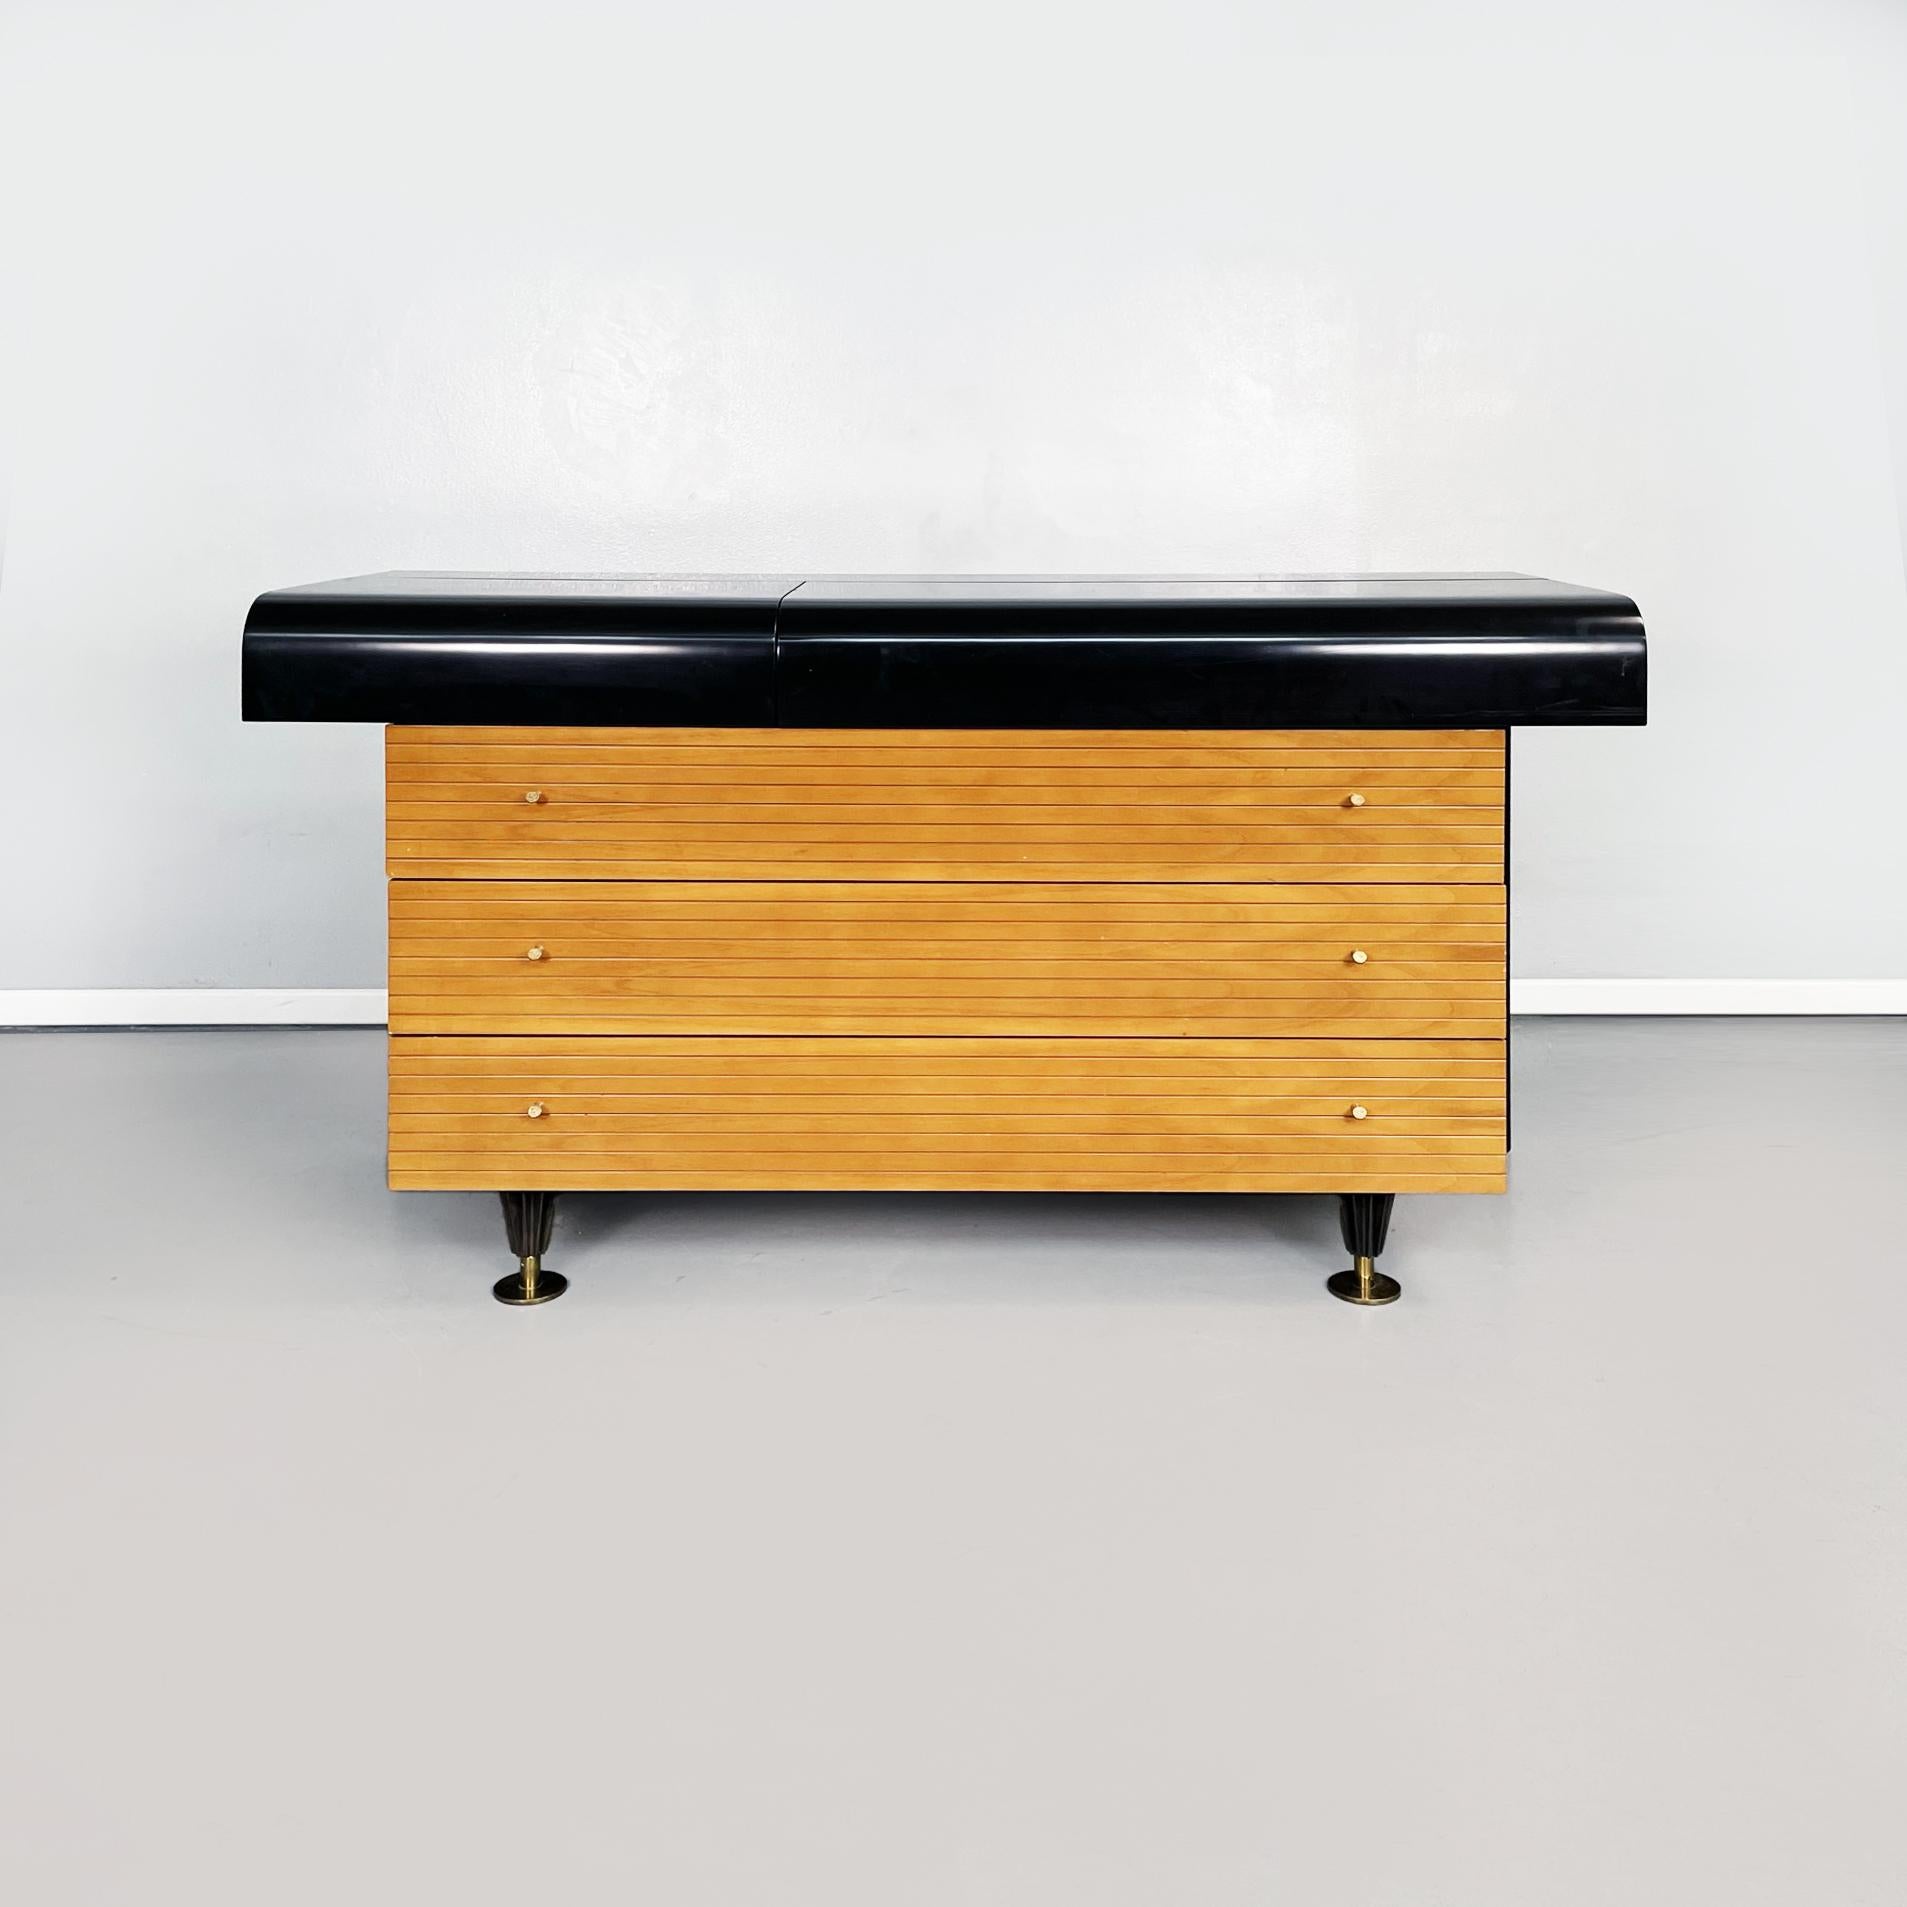 Italian mid-century black wooden, brass console by Pierre Cardin, 1980s
Wooden sideboard with rectangular base. The top of the chest of drawers is rectangular with a curved front profile, in black painted wood. There is a compartment with two